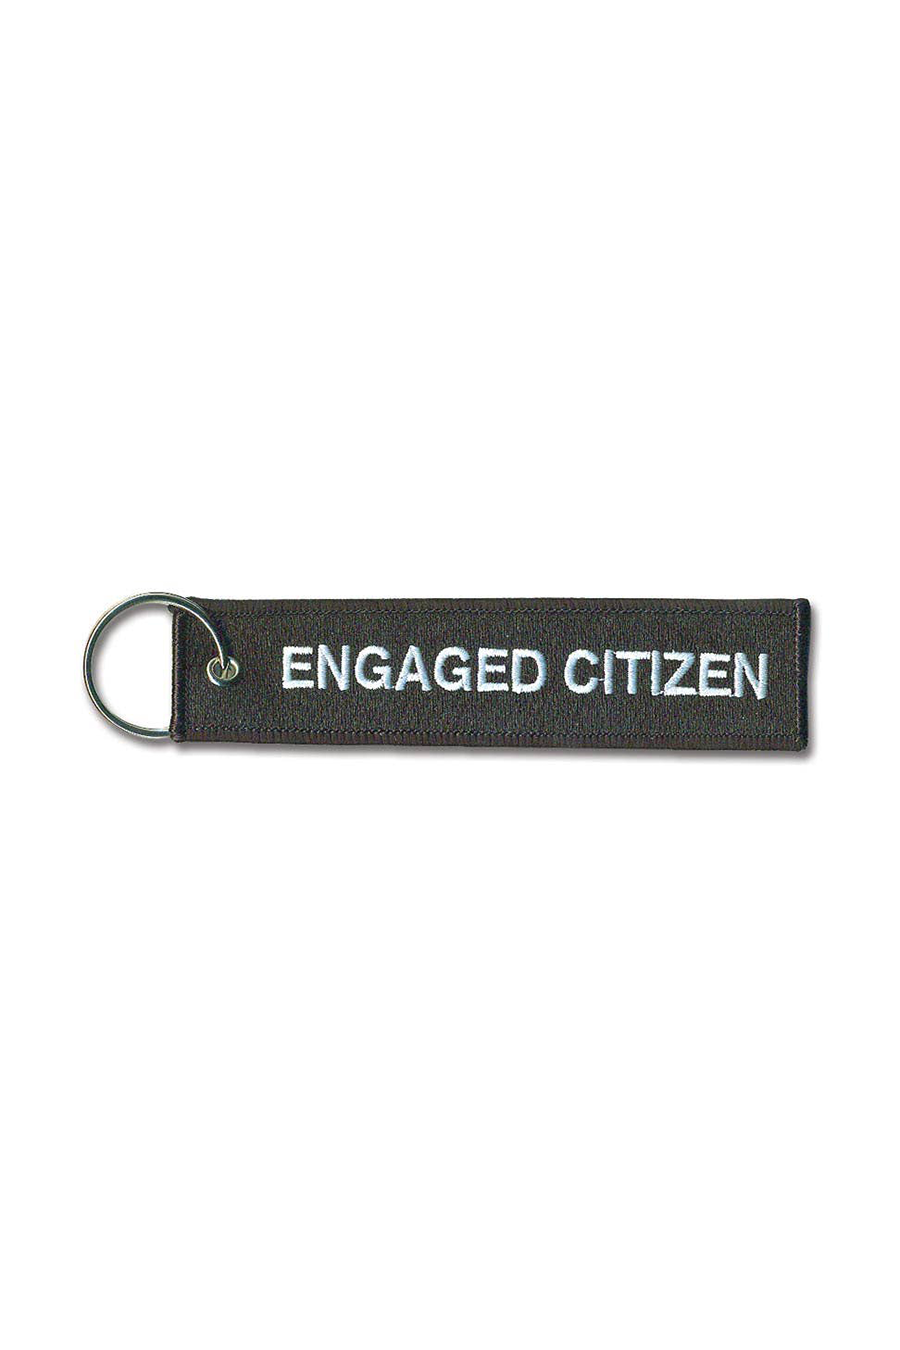 Engaged Citizen Keychain - Main Image Number 1 of 1